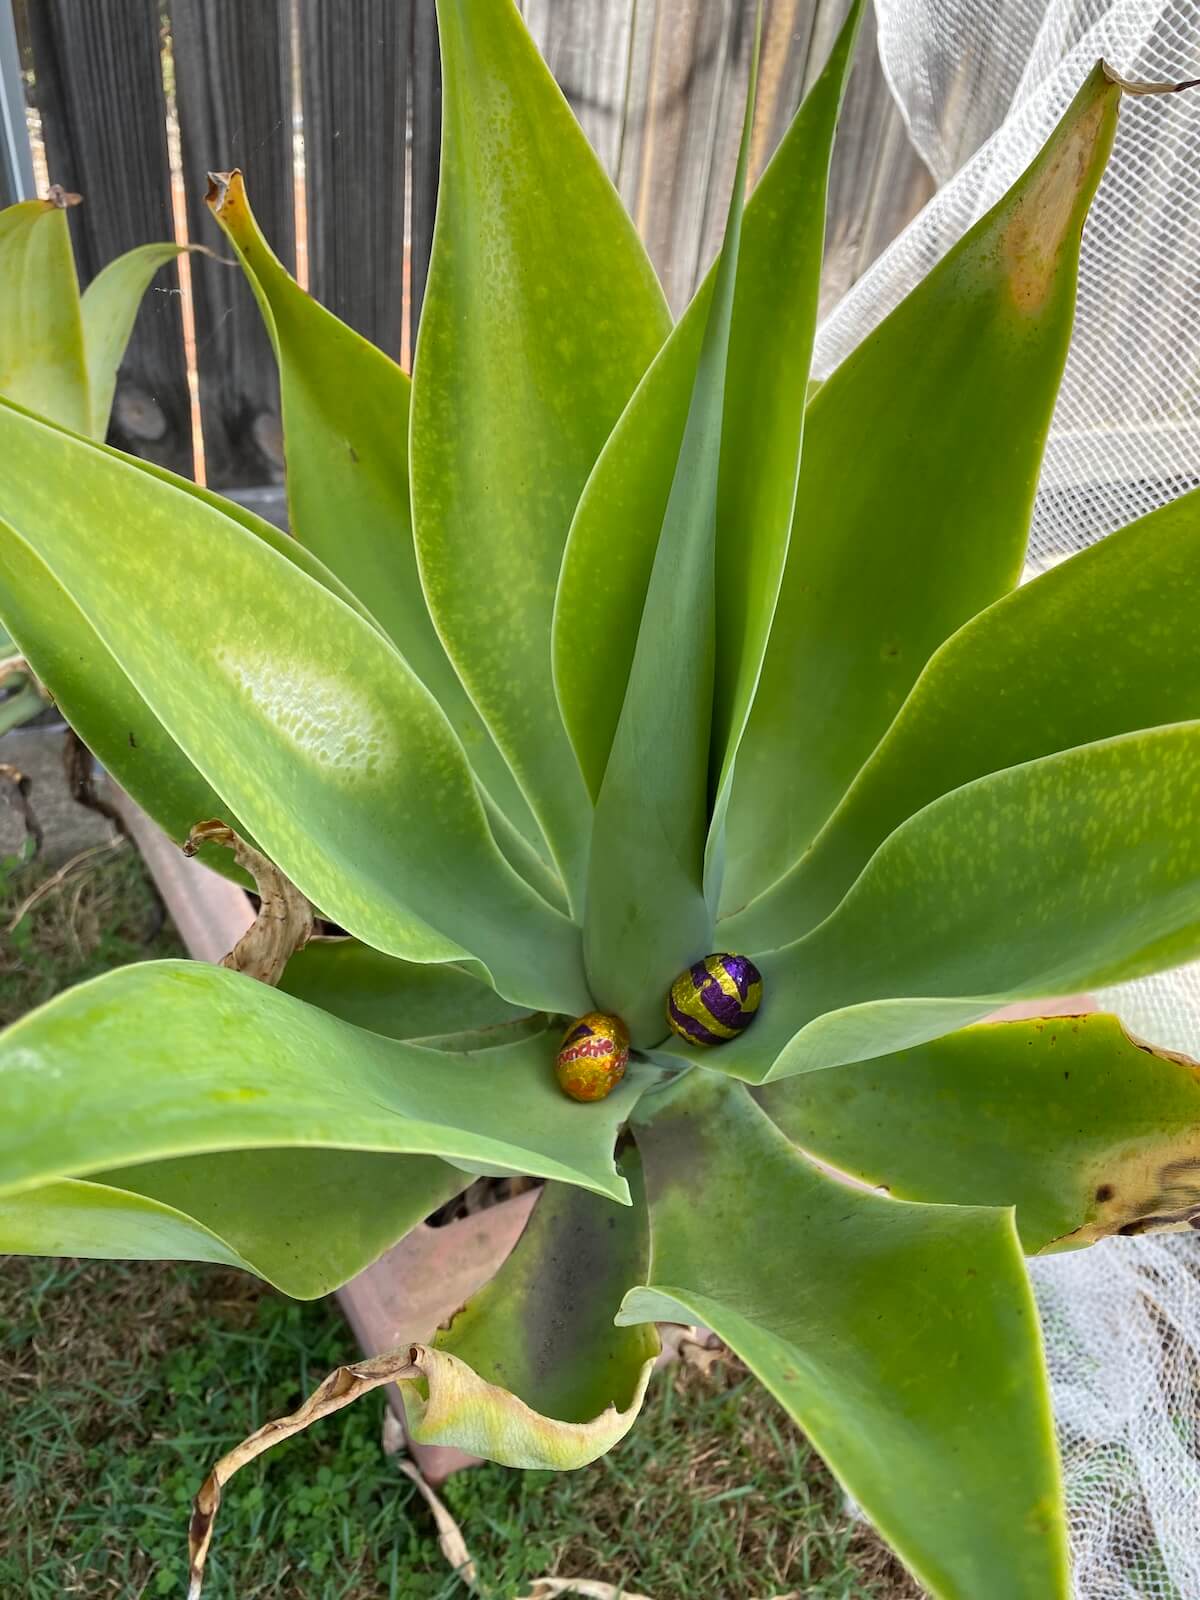 Easter eggs hidden in the leaves of an outdoor plant